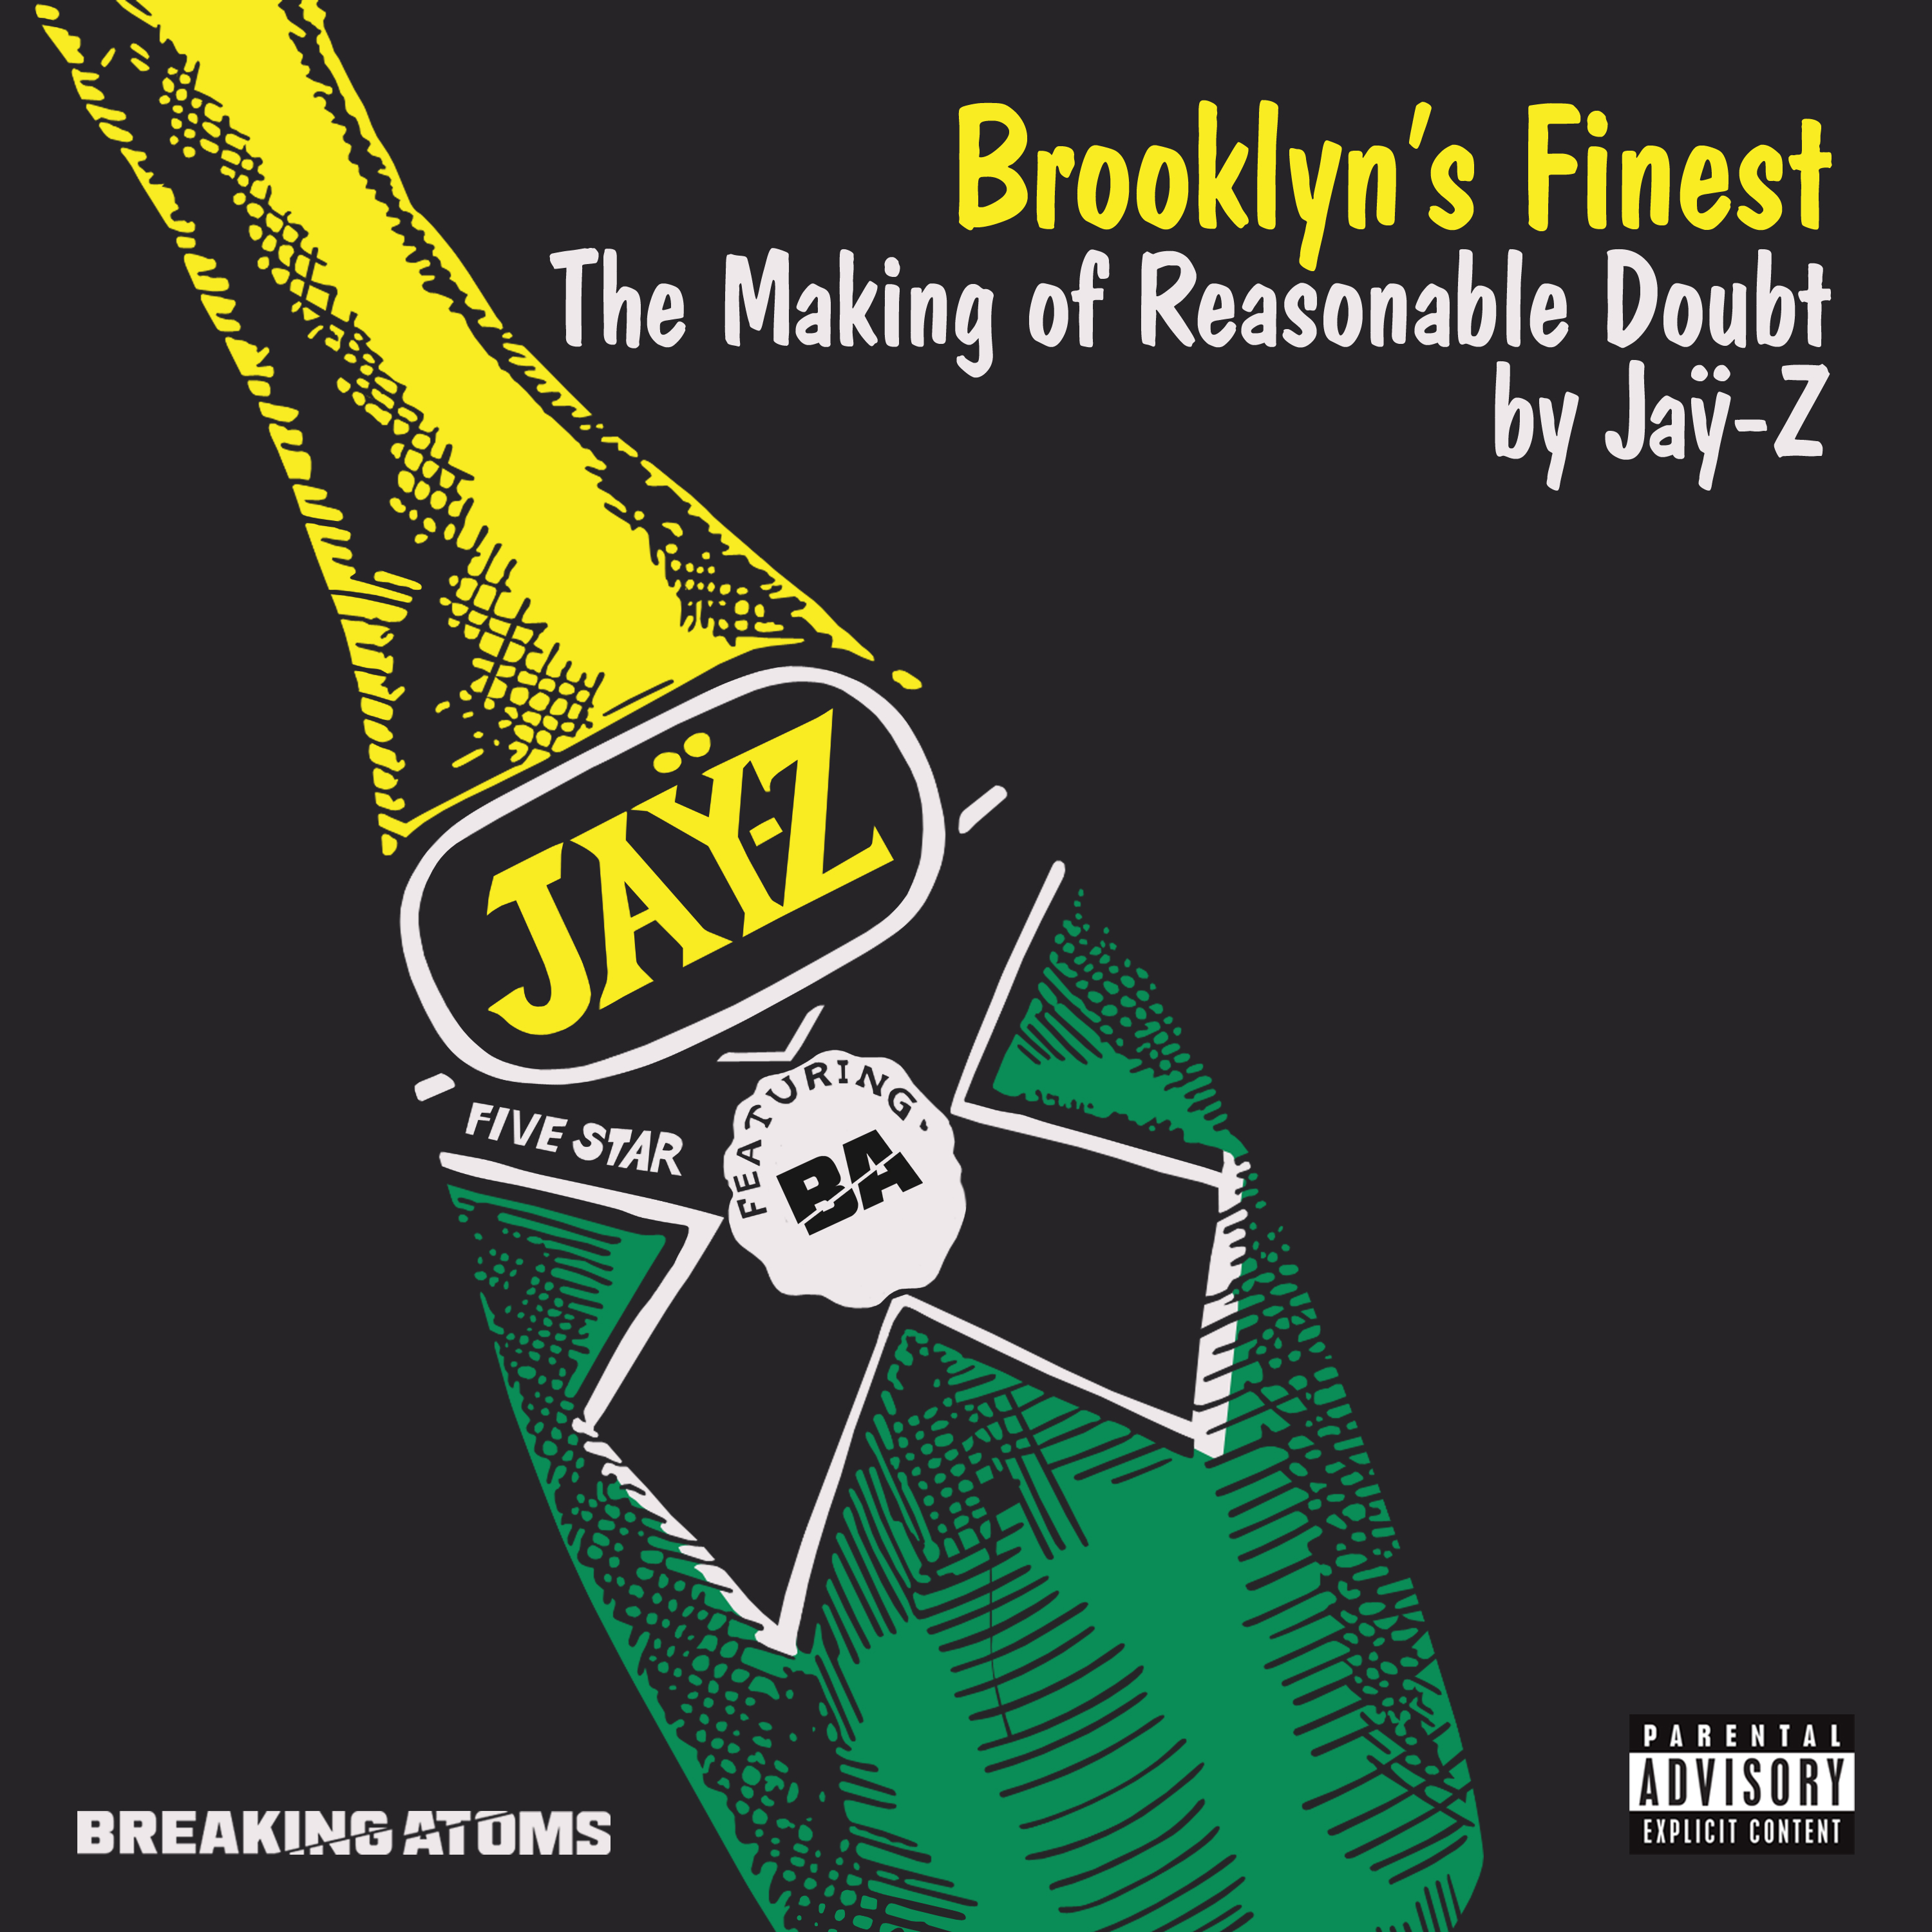 Brooklyn's Finest: The Making of Reasonable Doubt by Jay-Z (Side A)